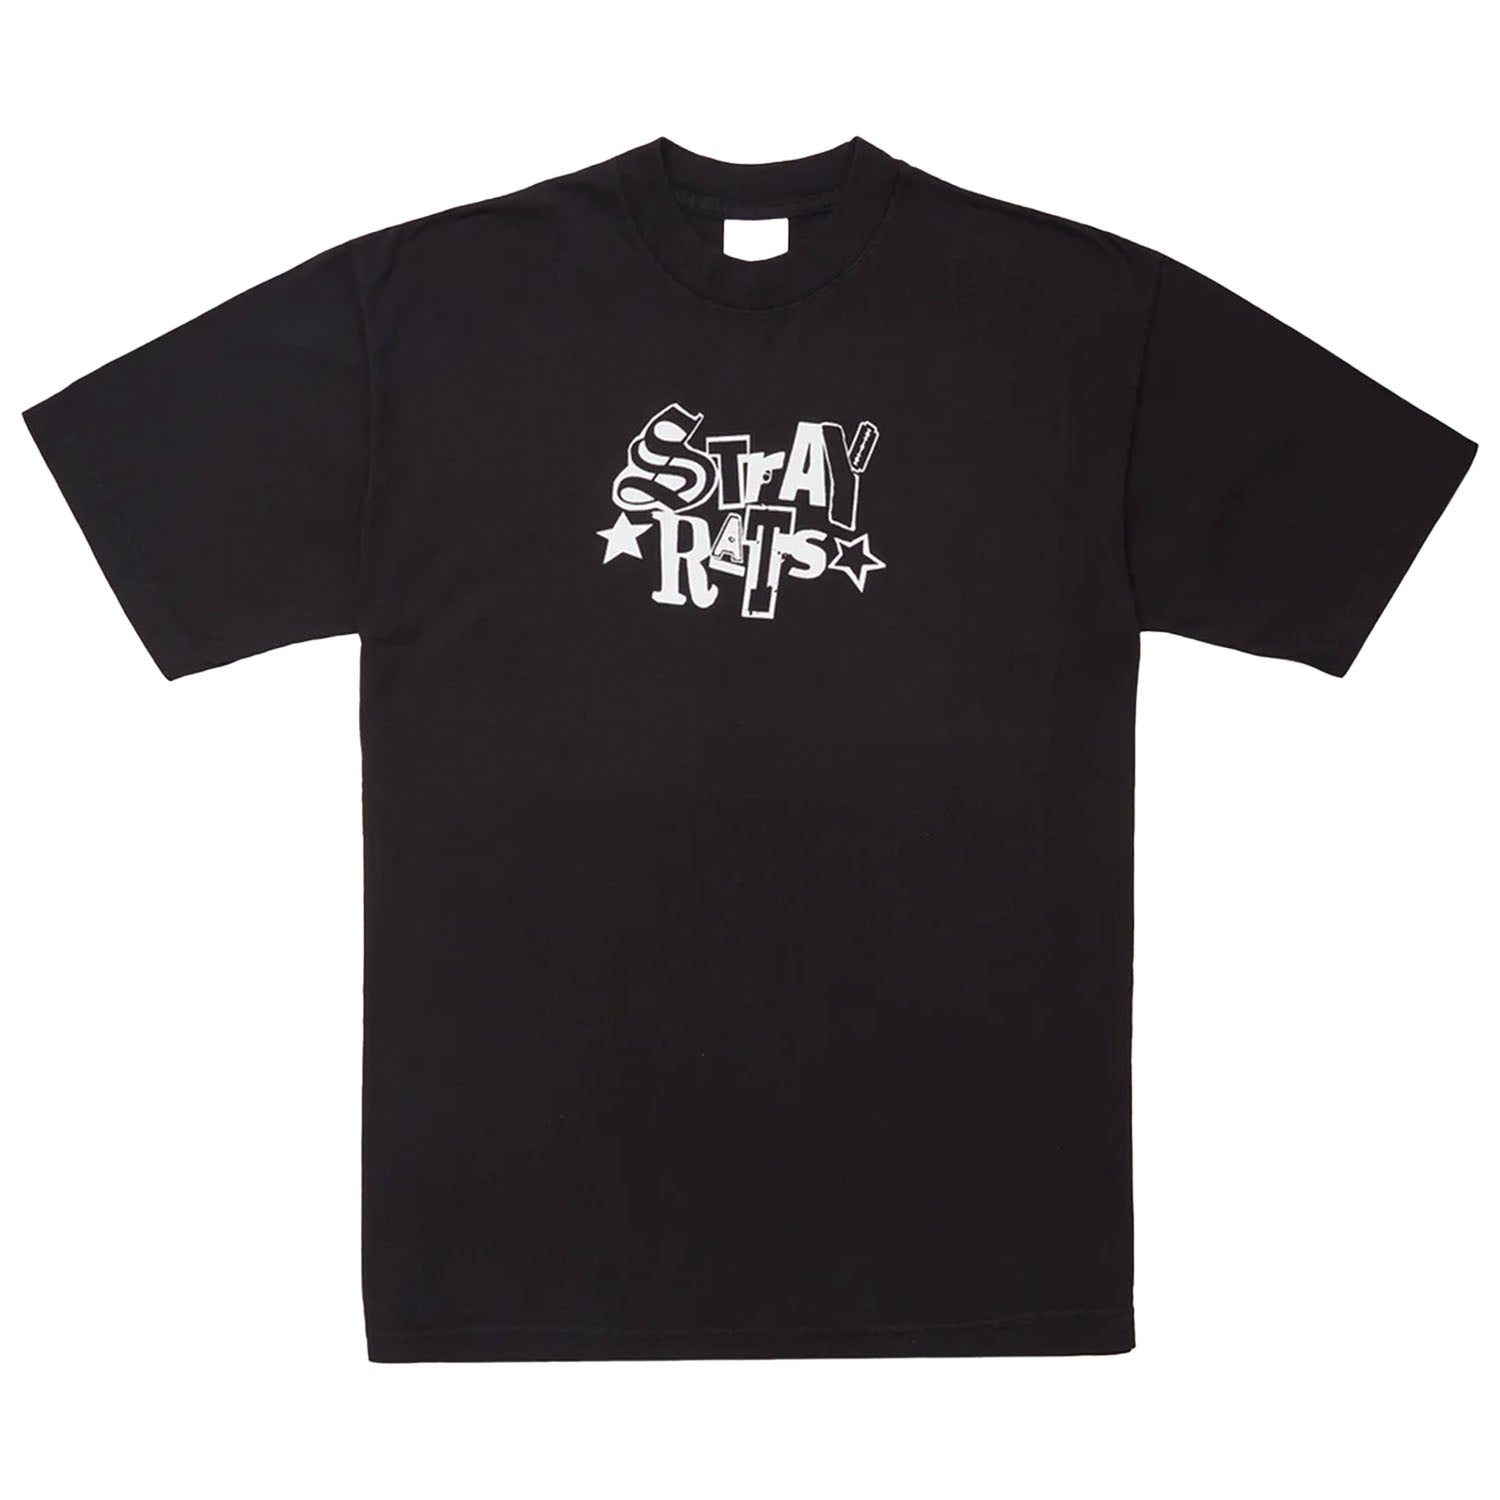 Cut Out Tee (Black)